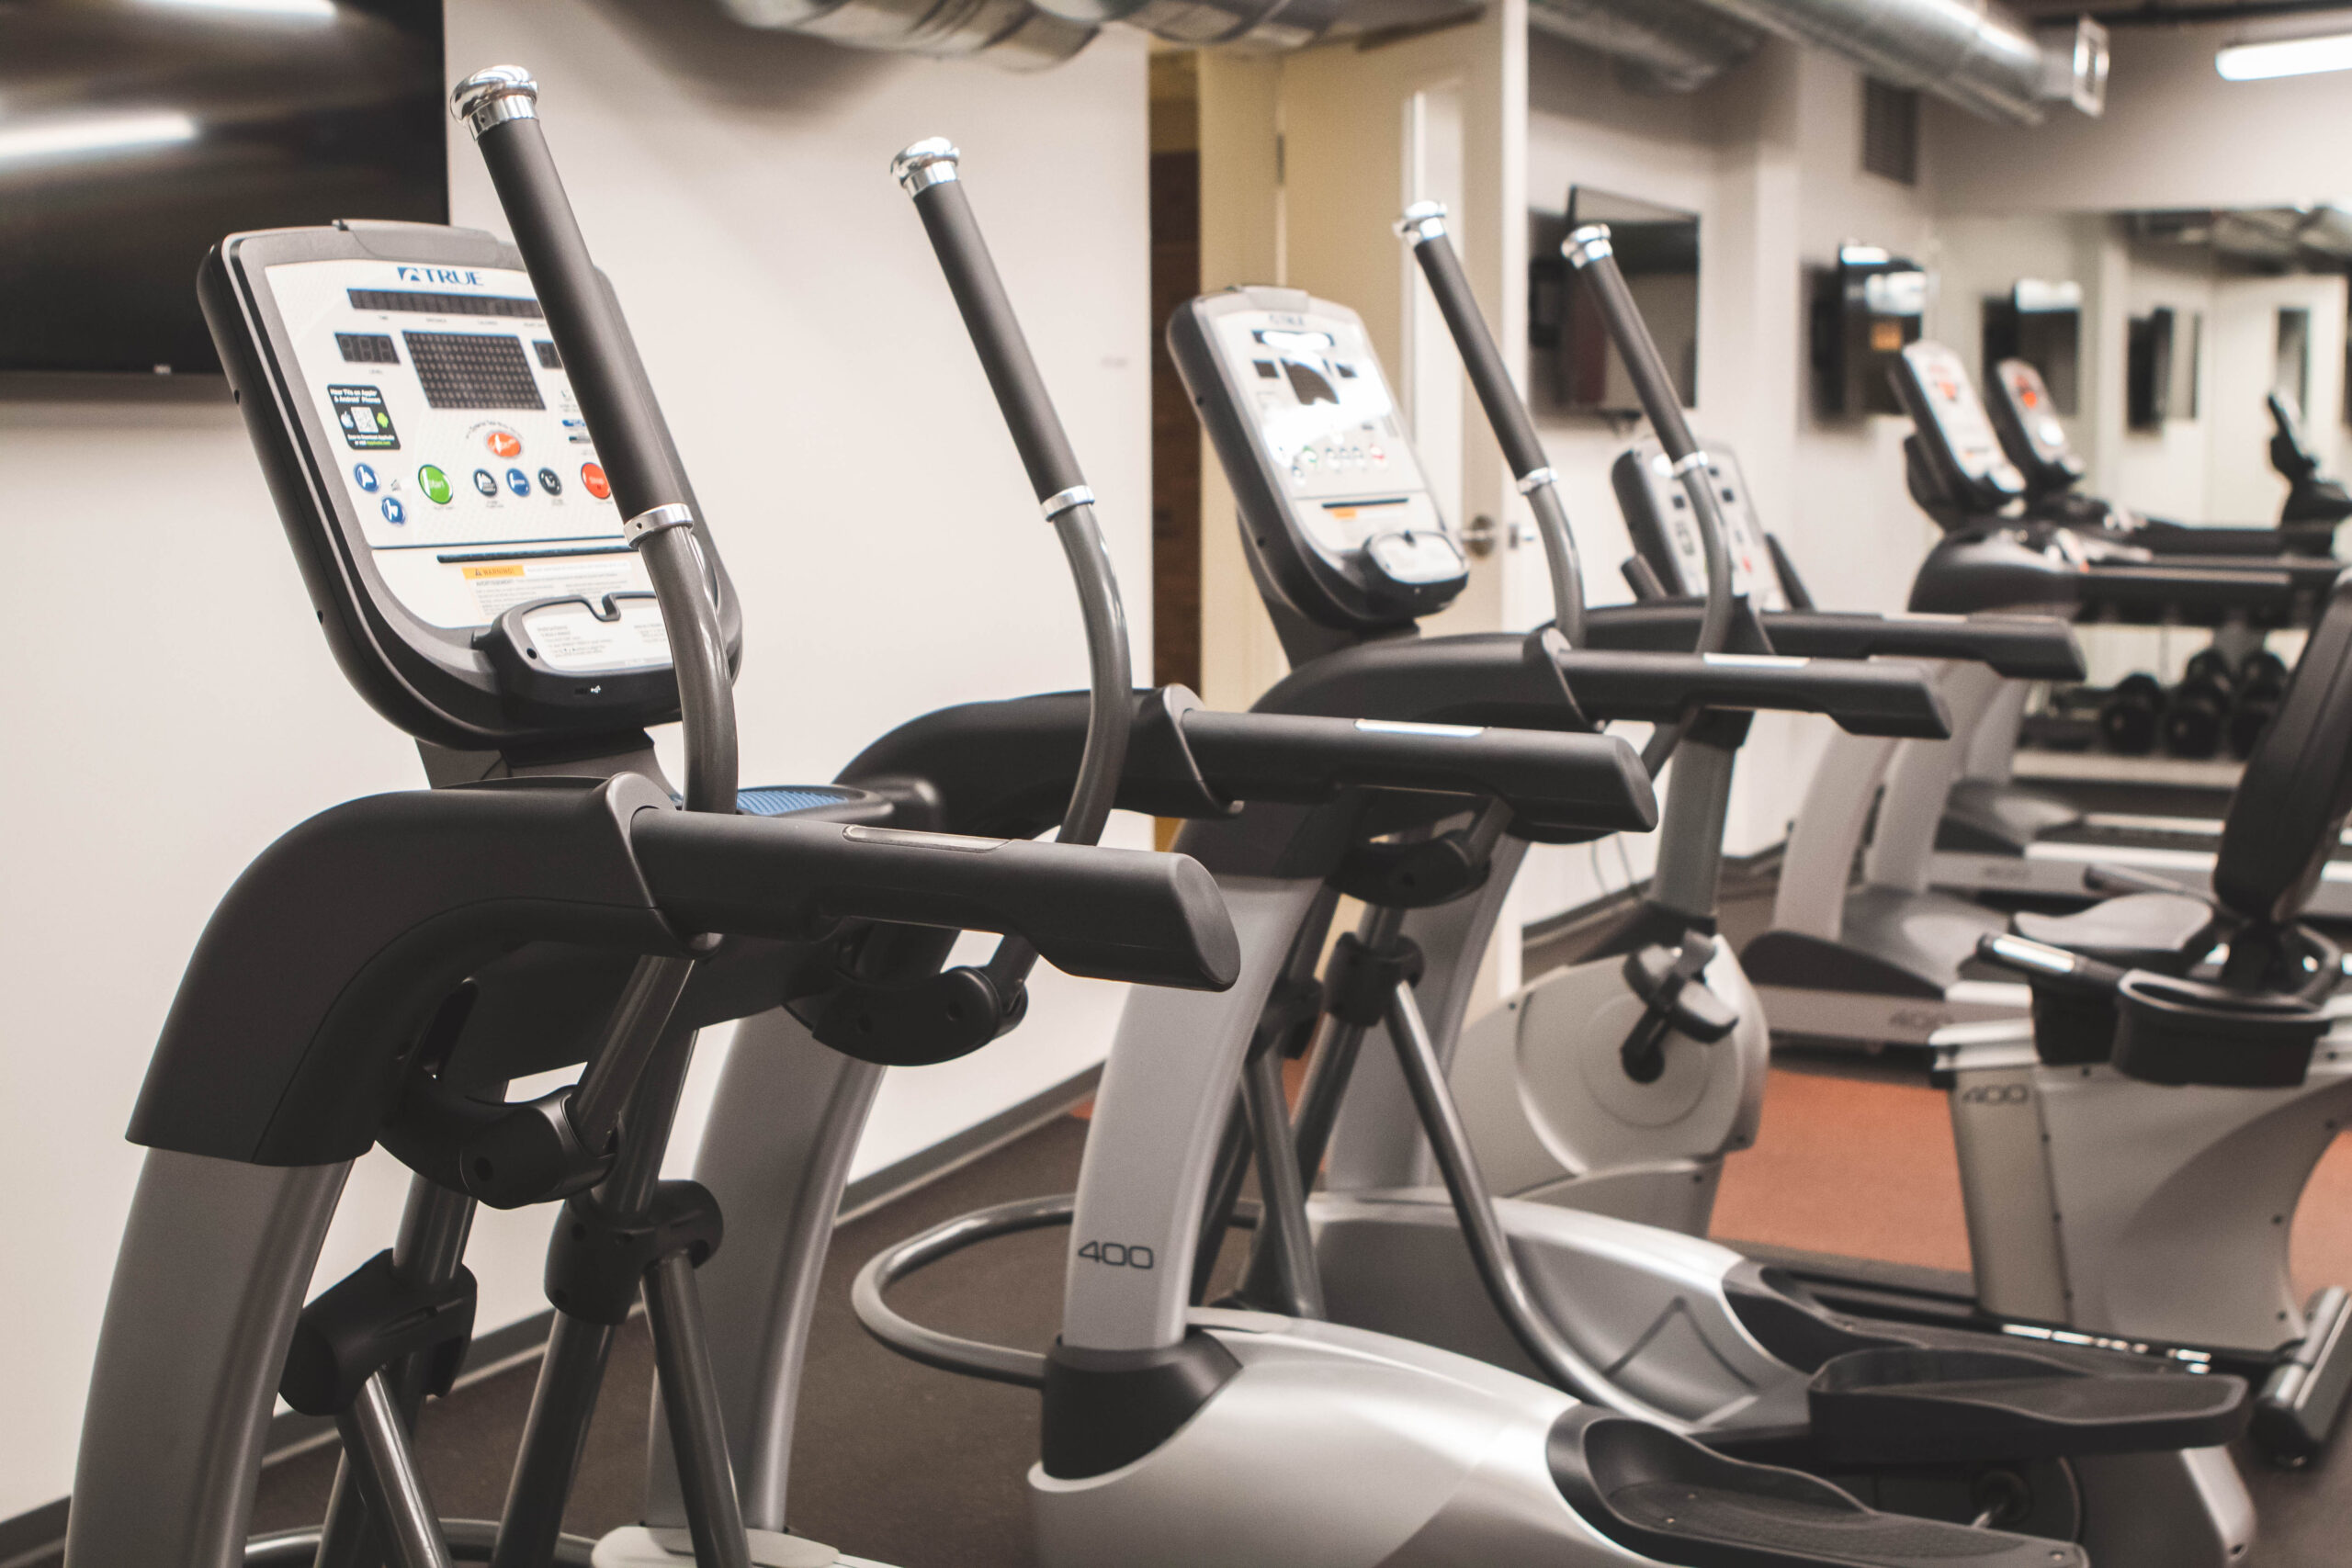 A row of cardio exercise equipment including elliptical machines and treadmills.